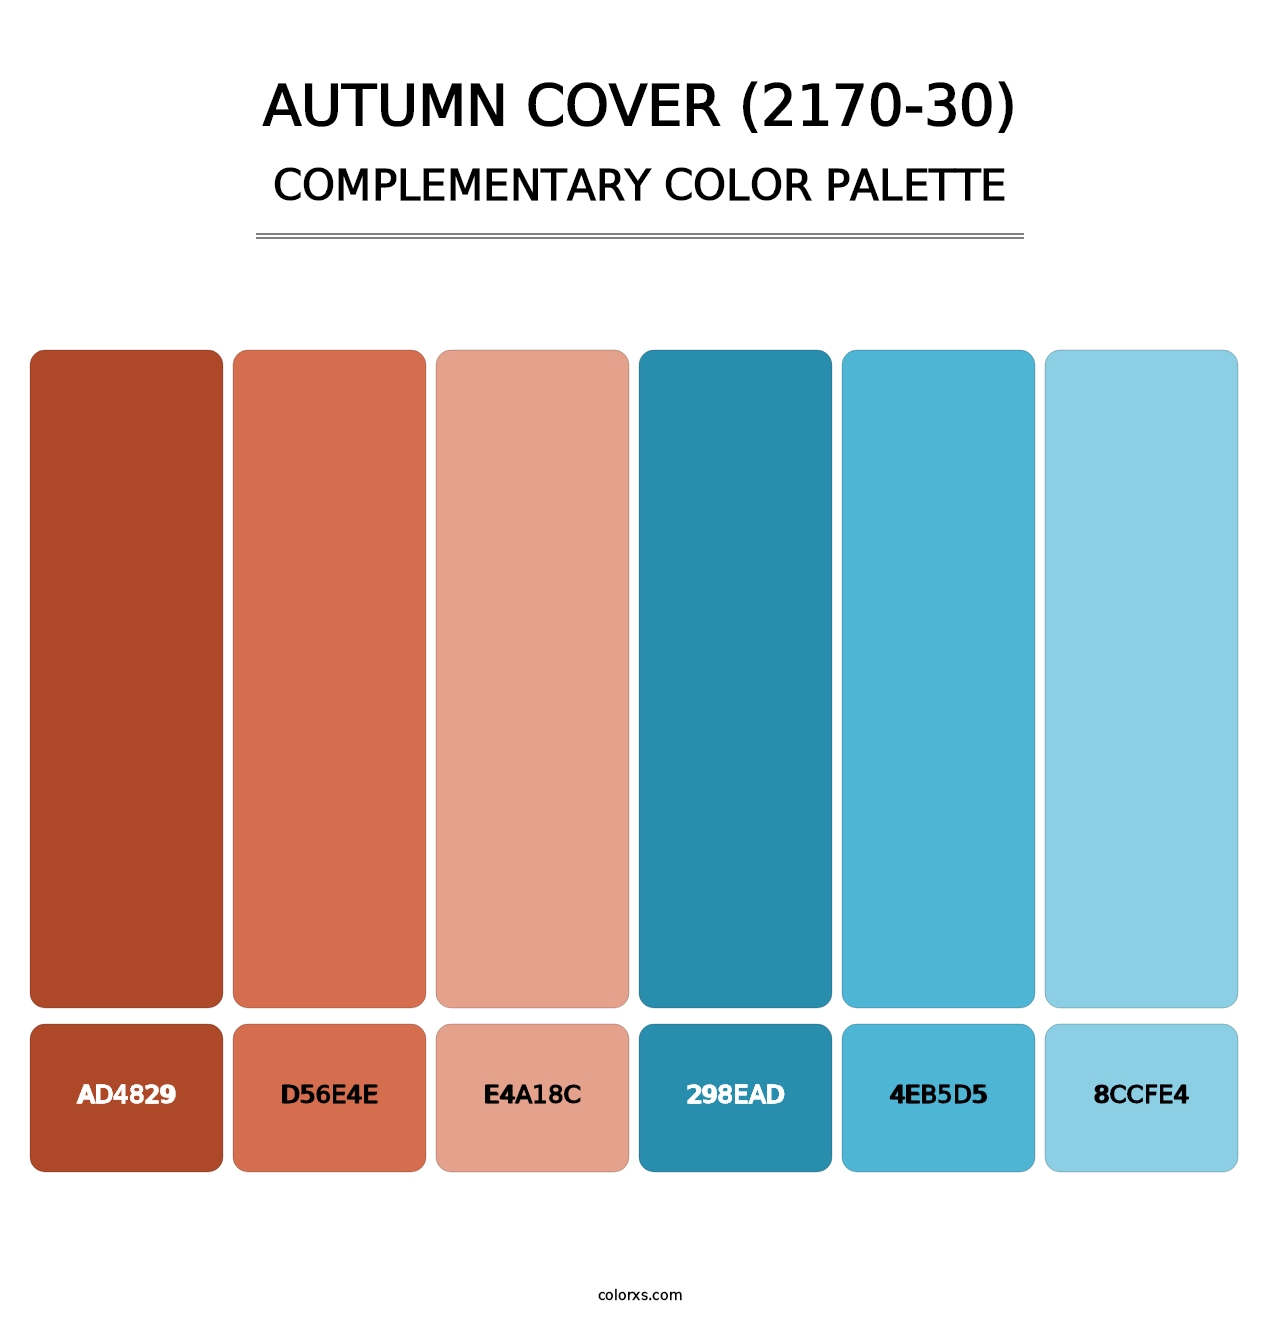 Autumn Cover (2170-30) - Complementary Color Palette